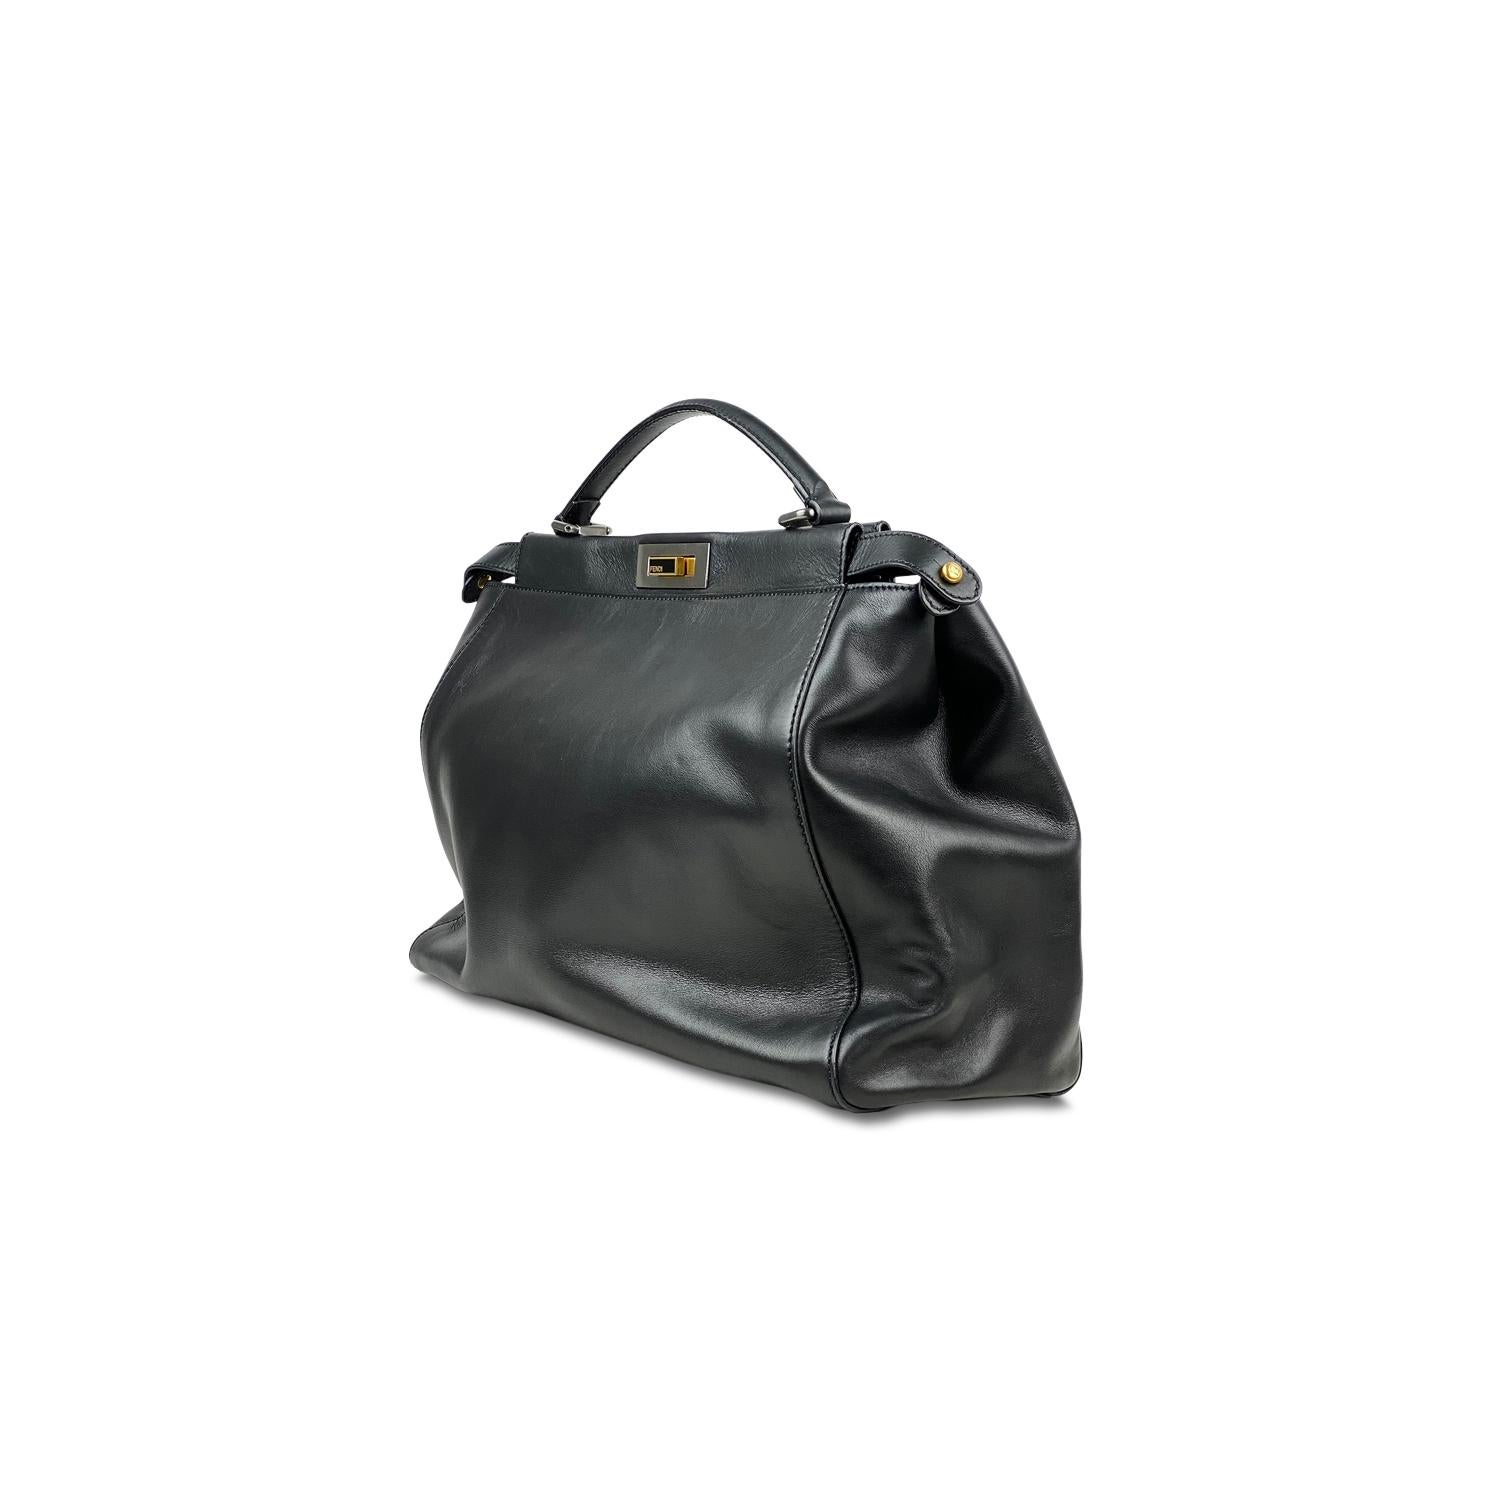 Black leather Fendi Large Peekaboo tote with

– Multi-tonal hardware,
– Single flat shoulder strap
– Single flat top handle
– Dual interior compartments, black suede lining, single interior zip pocket and dual turn-lock closures at top

Overall